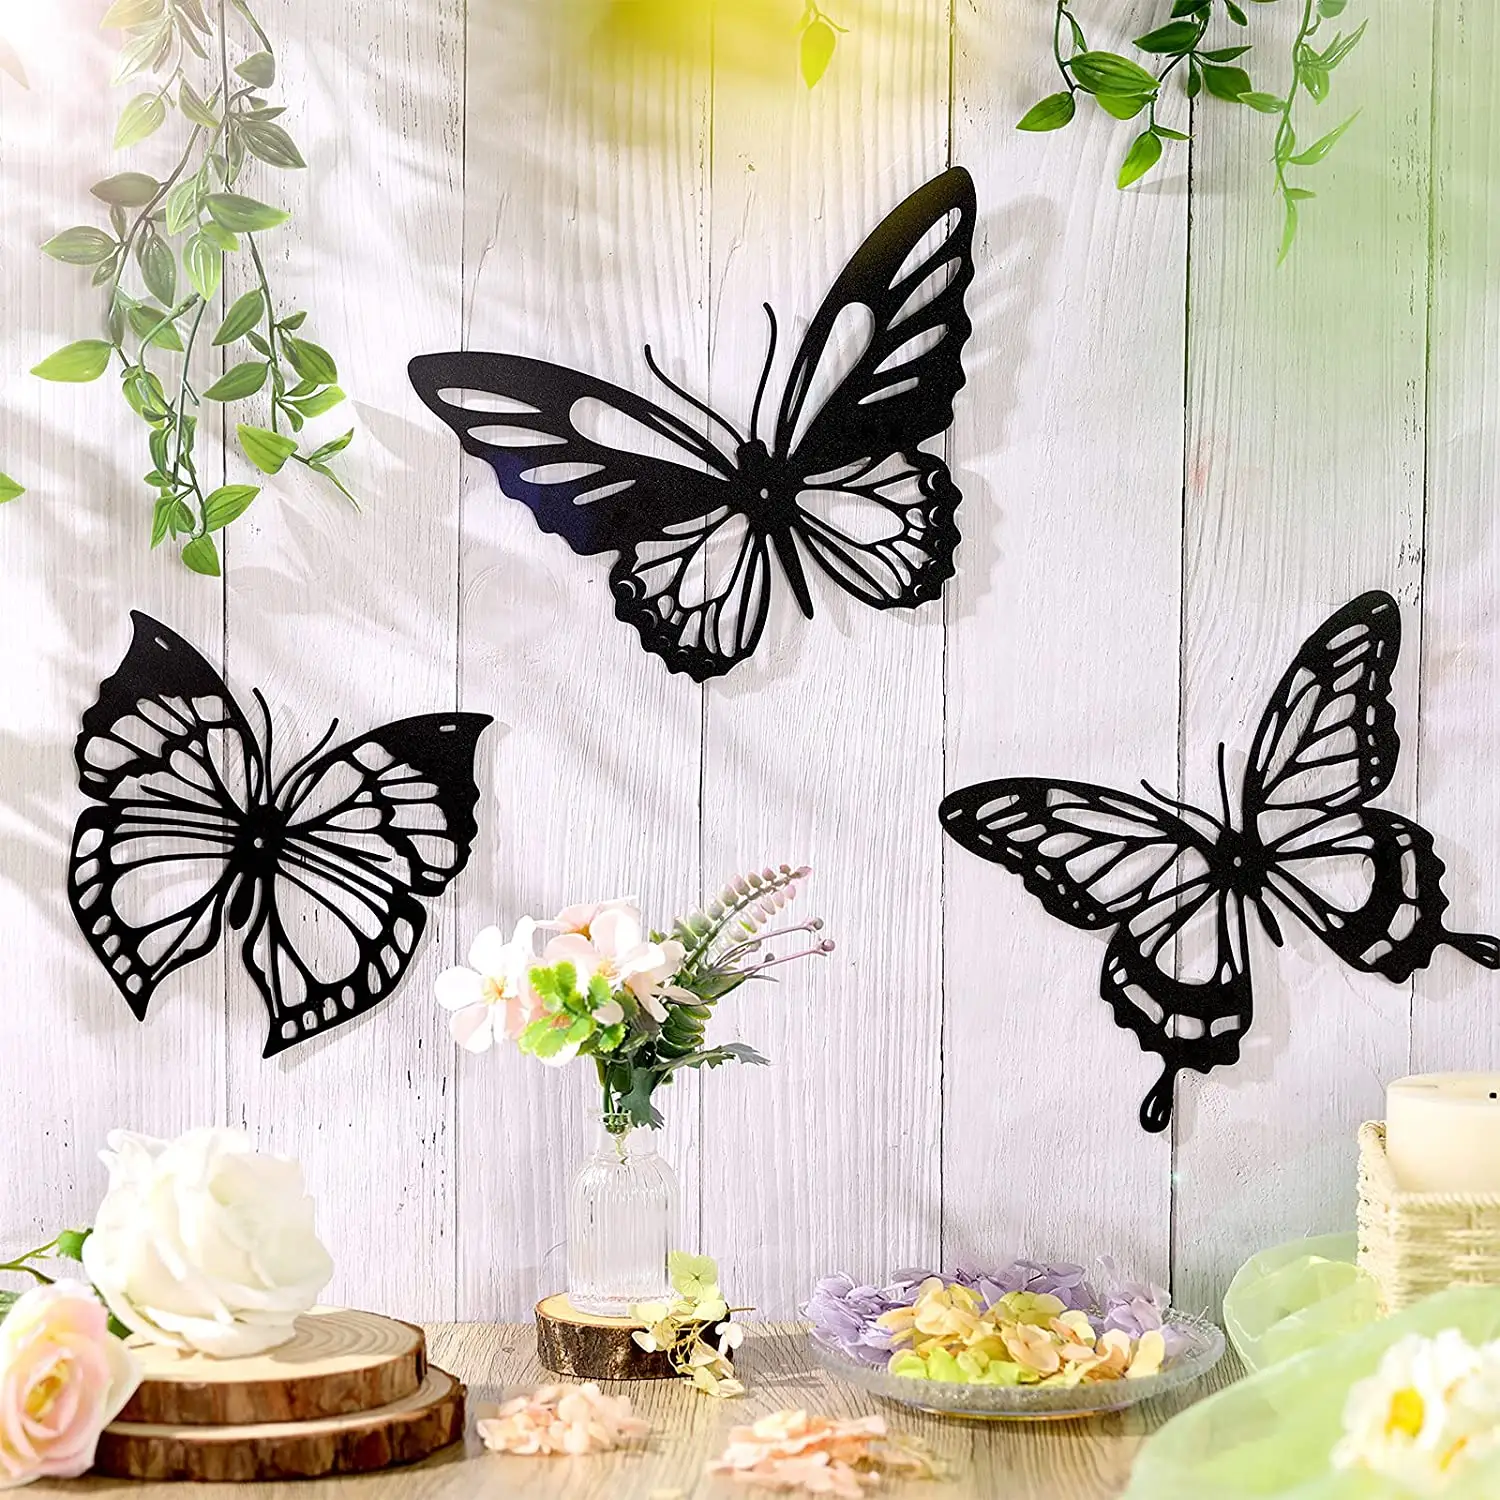 Metal Wall Decor Black Butterfly Metal Wall Art Hanging Wall Decor For Modern Farmhouse Rustic Easter Decorative Animal 1.2mm